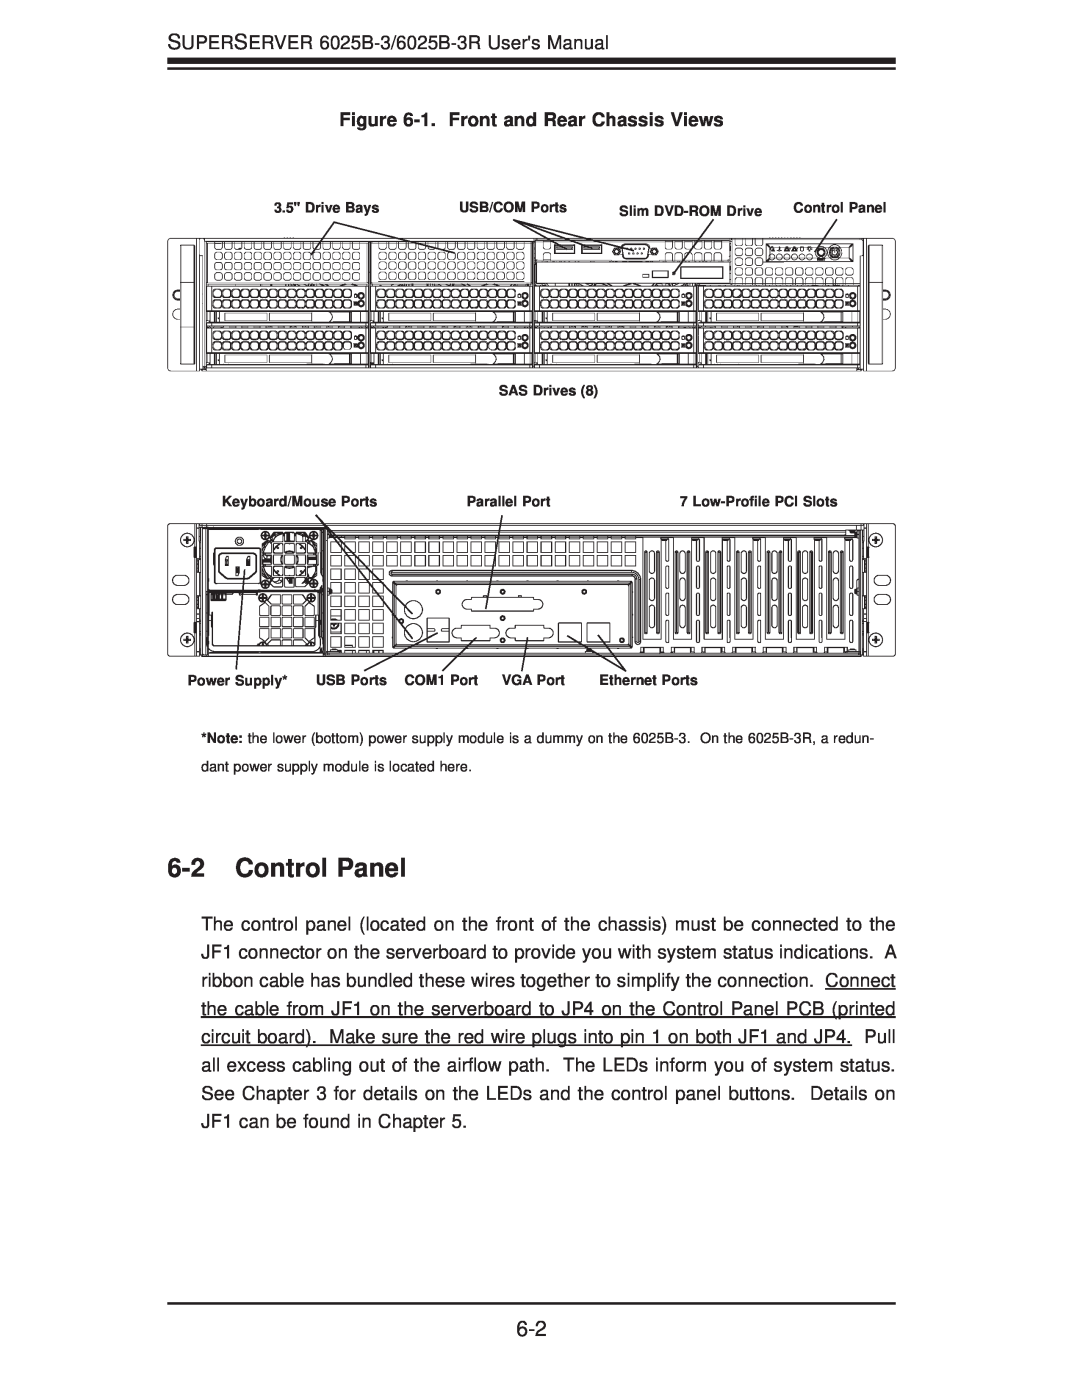 SUPER MICRO Computer 6025B-3R user manual Control Panel, 1. Front and Rear Chassis Views 